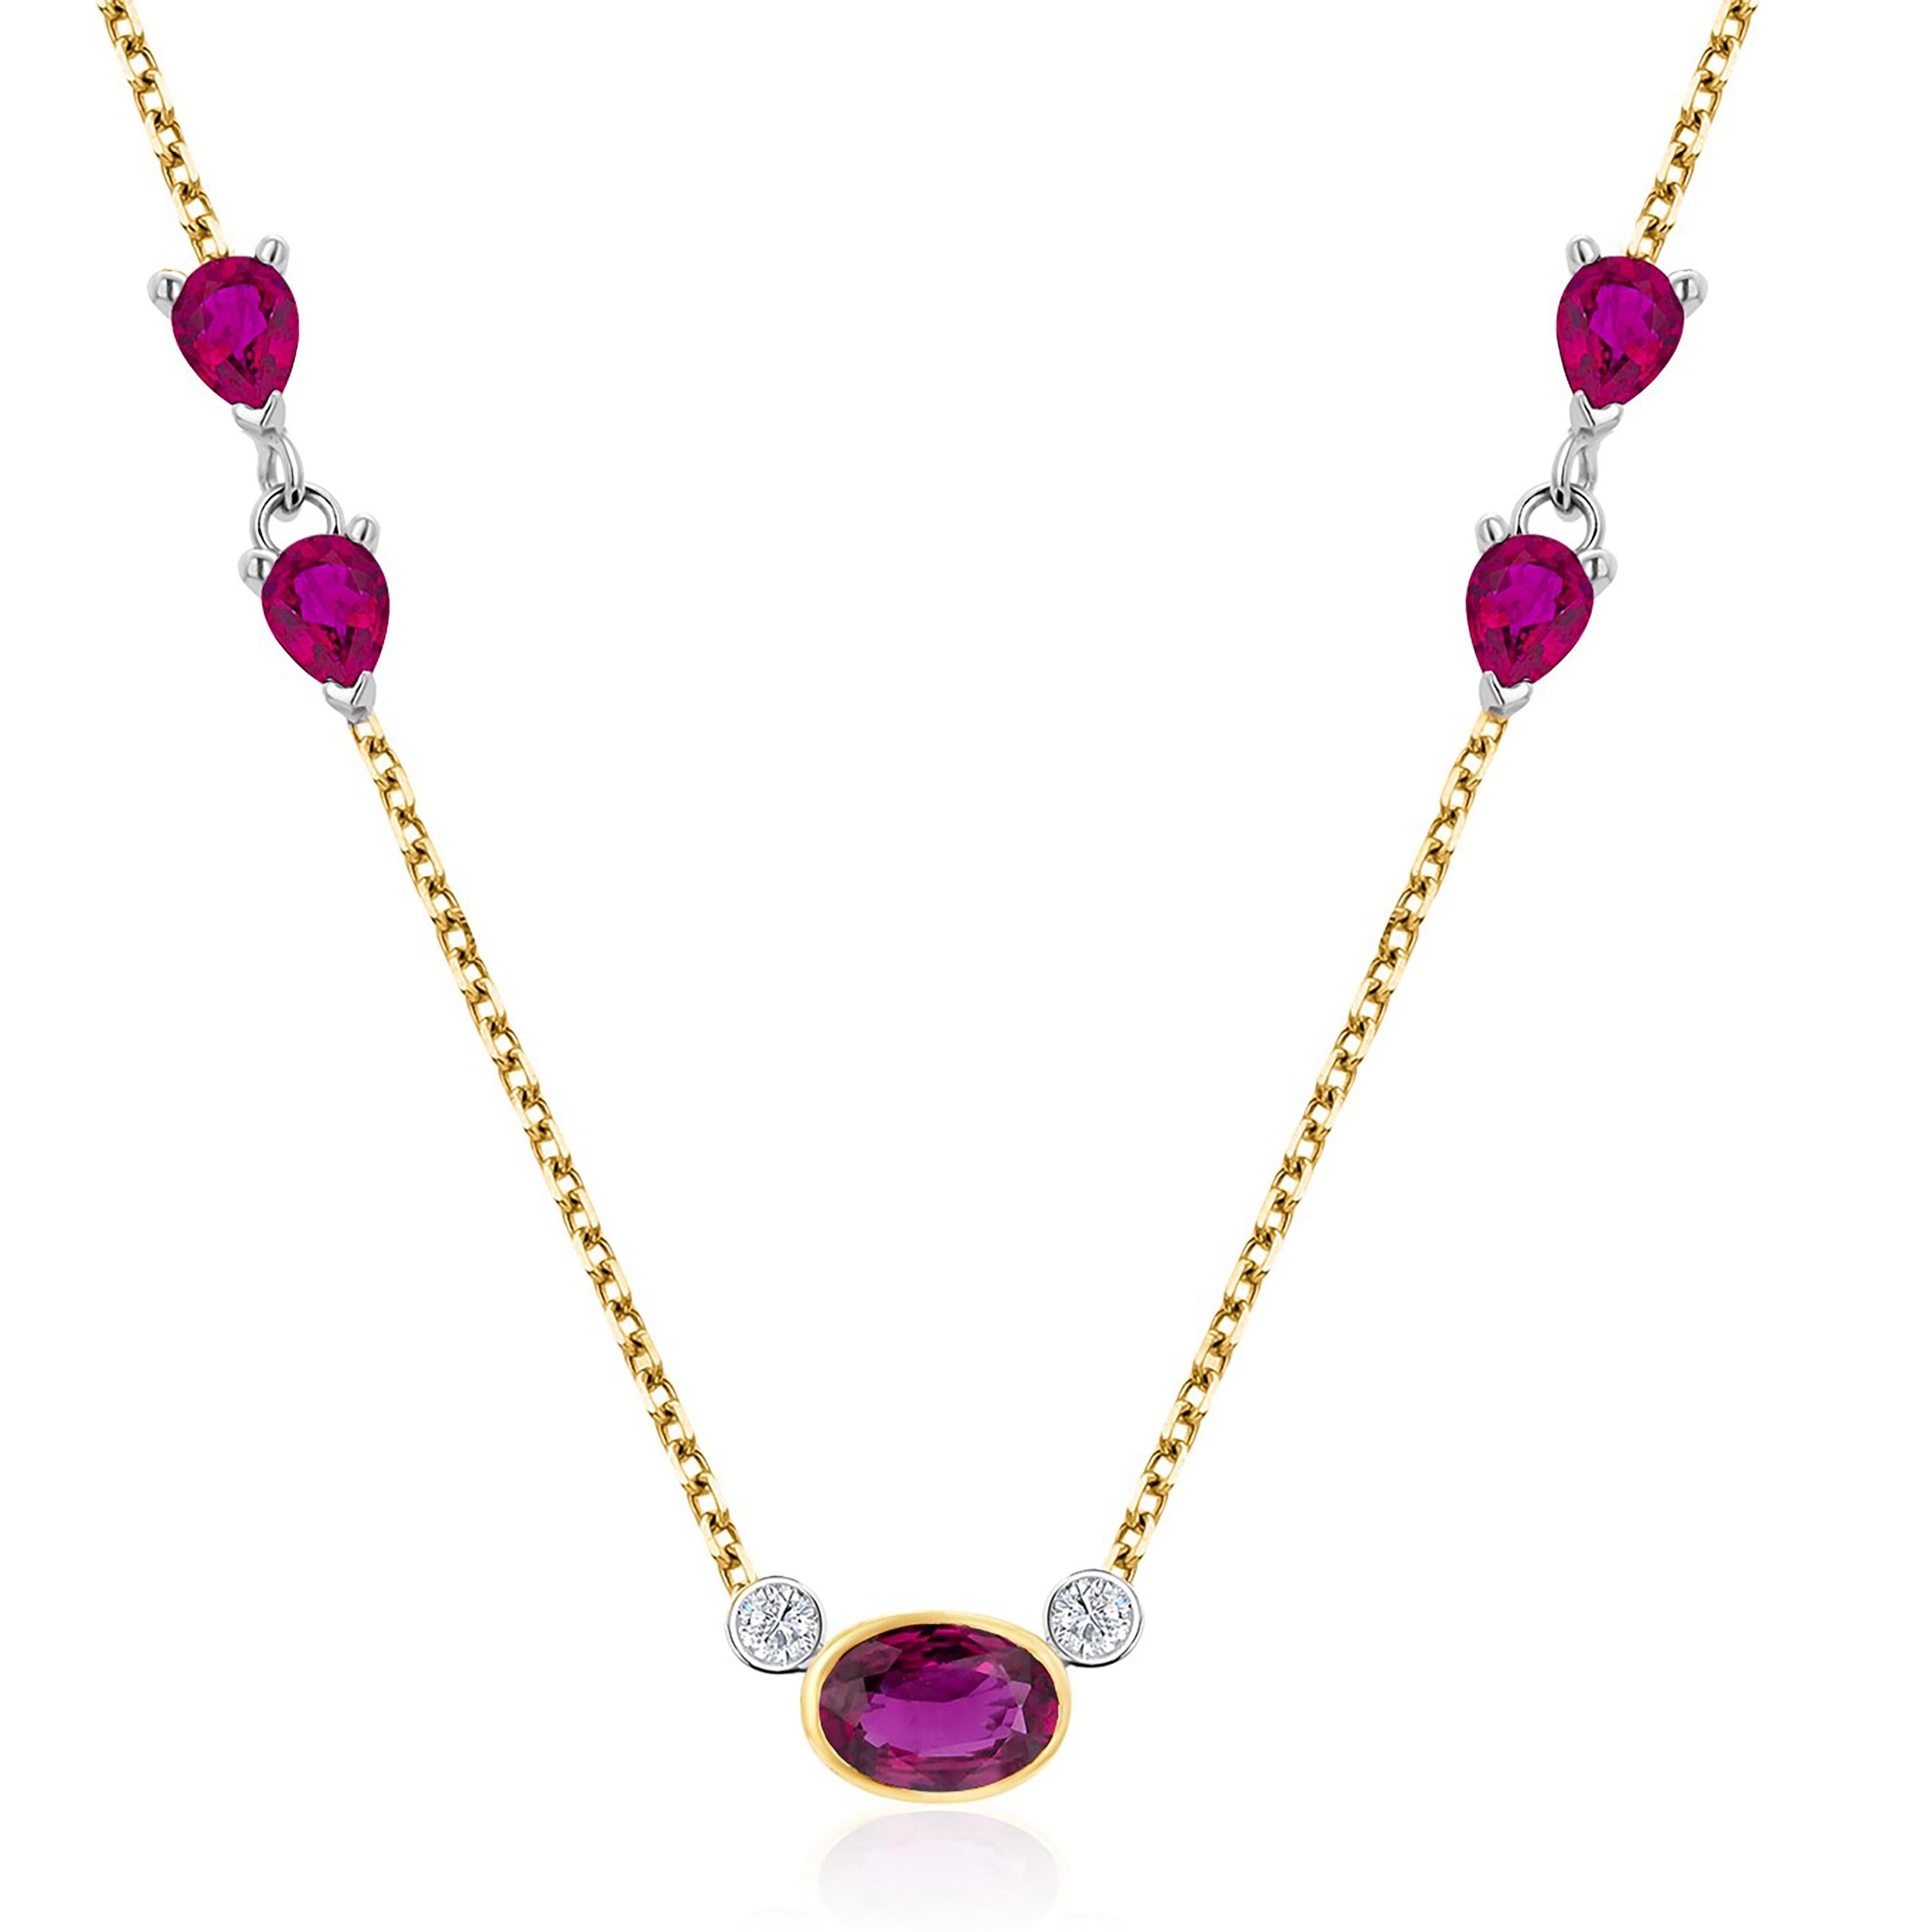 Burma Ruby Diamonds Pear Rubies 1.80 Carat 14 Karat Gold Necklace Pendant In New Condition For Sale In New York, NY